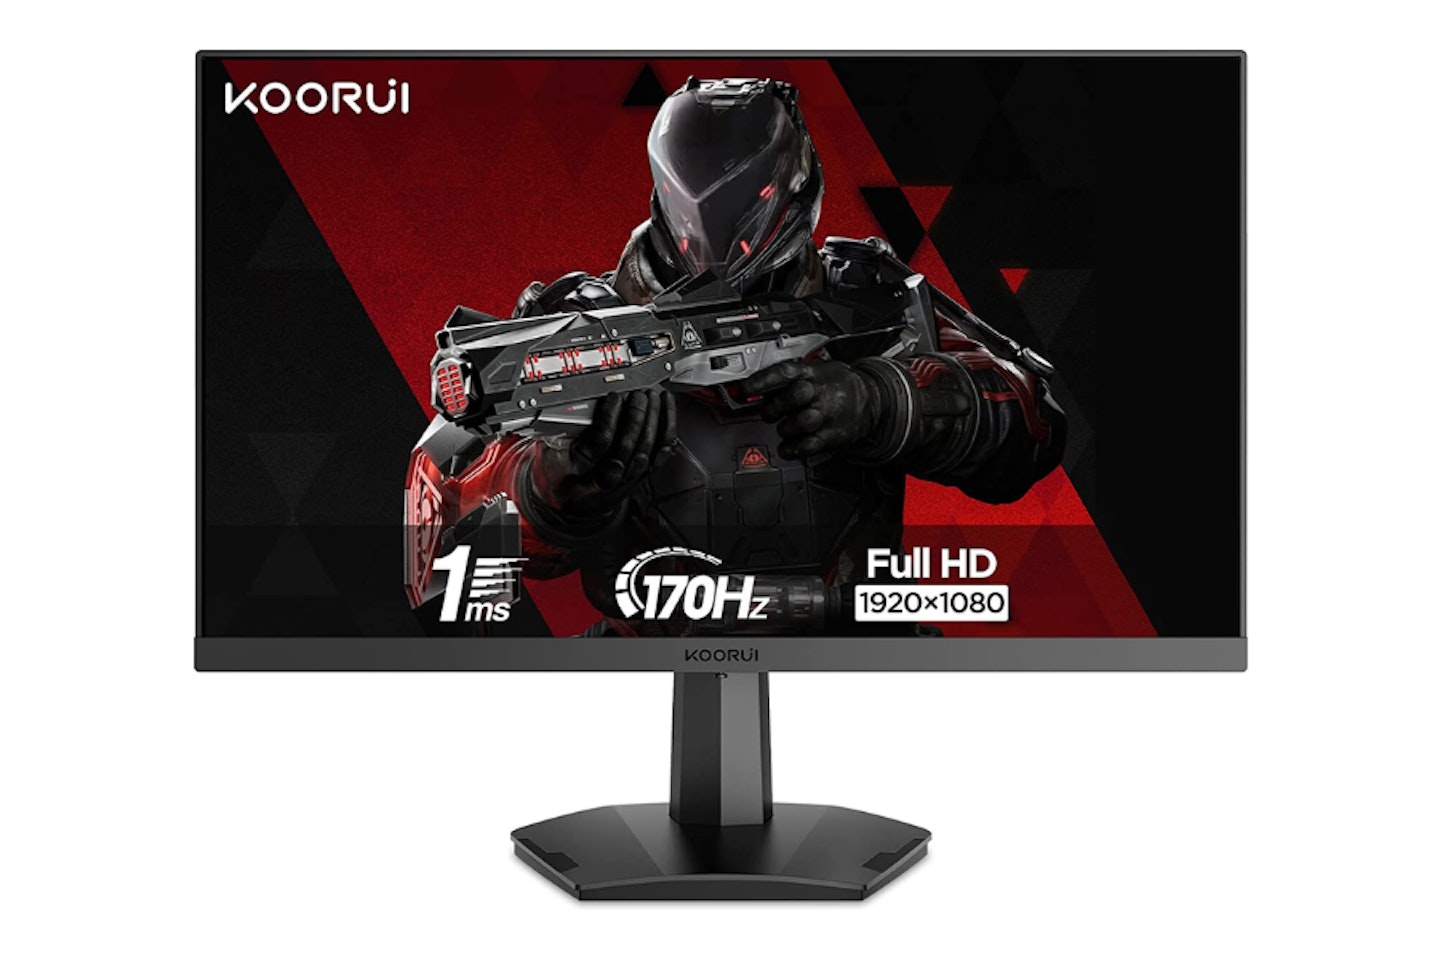 KOORUI 24.5 Inch FHD Gaming Monitor - one of the Best monitors for Xbox Series X in 2023